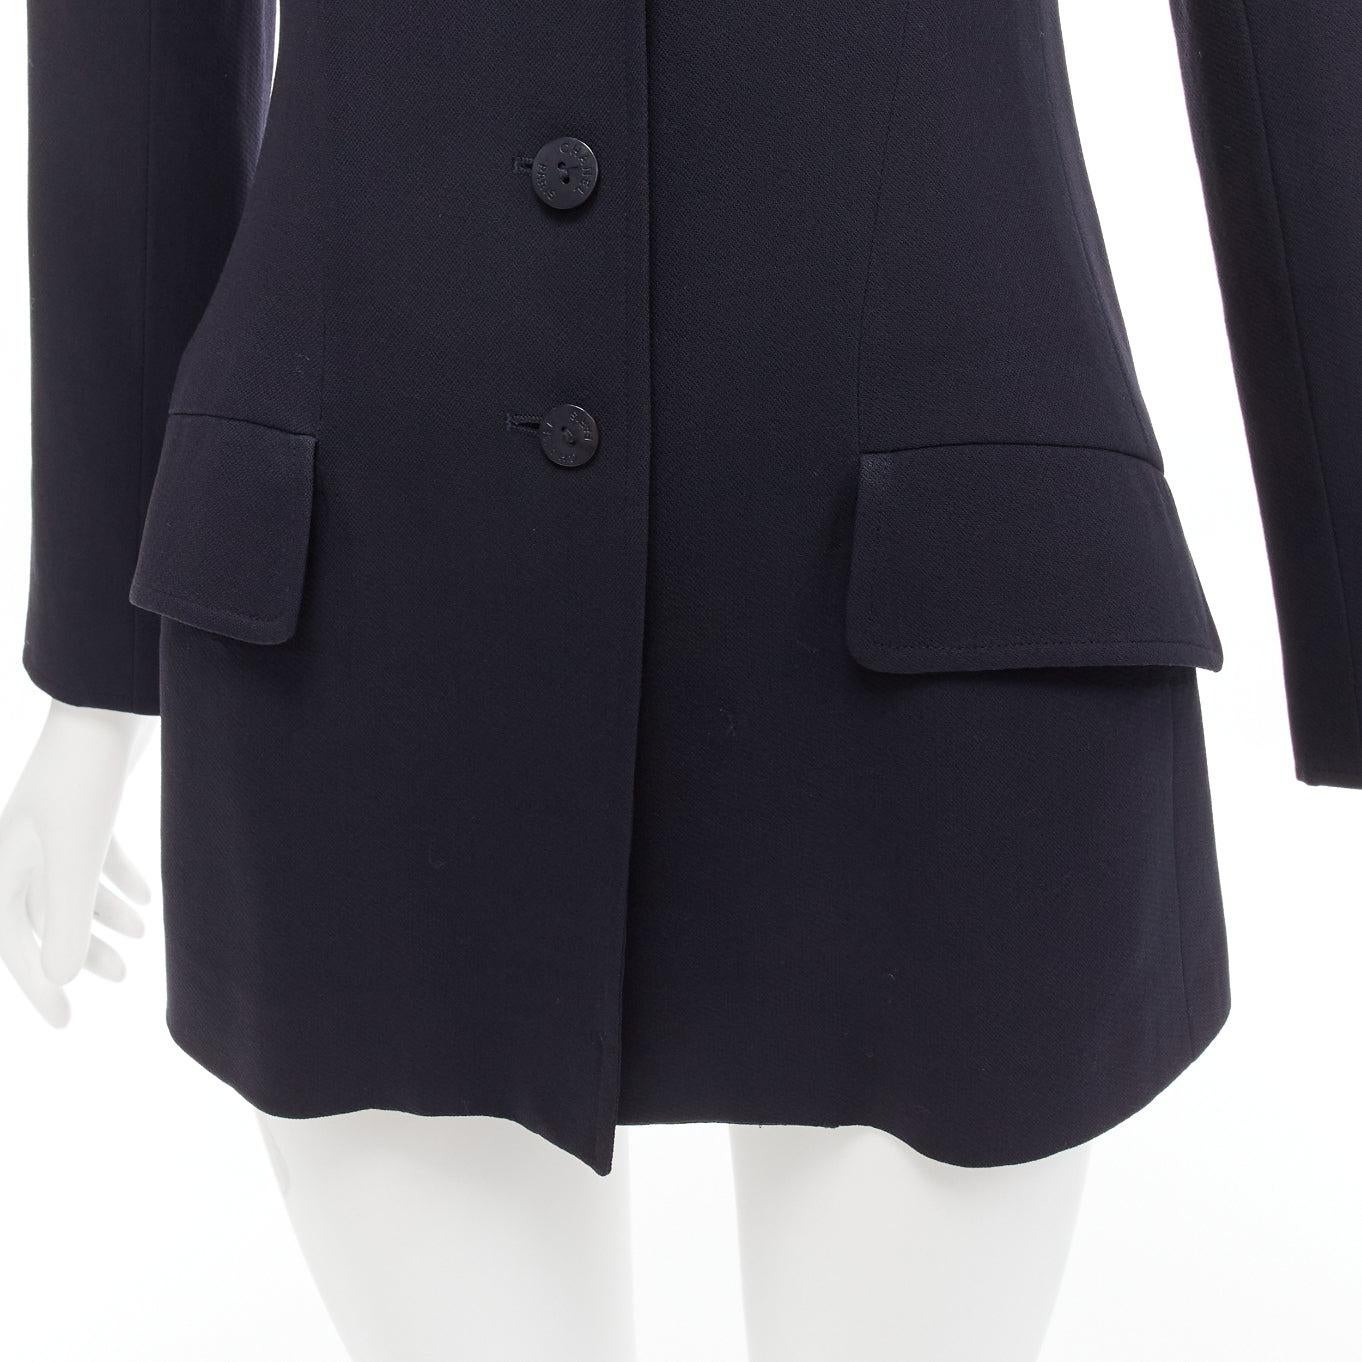 CHANEL Karl Lagerfeld 98A Vintage navy wool CC button blazer FR36 S
Reference: TGAS/D00868
Brand: Chanel
Designer: Karl Lagerfeld
Collection: 98A
Material: Wool
Color: Navy
Pattern: Solid
Closure: Button
Lining: Navy Silk
Extra Details: Single